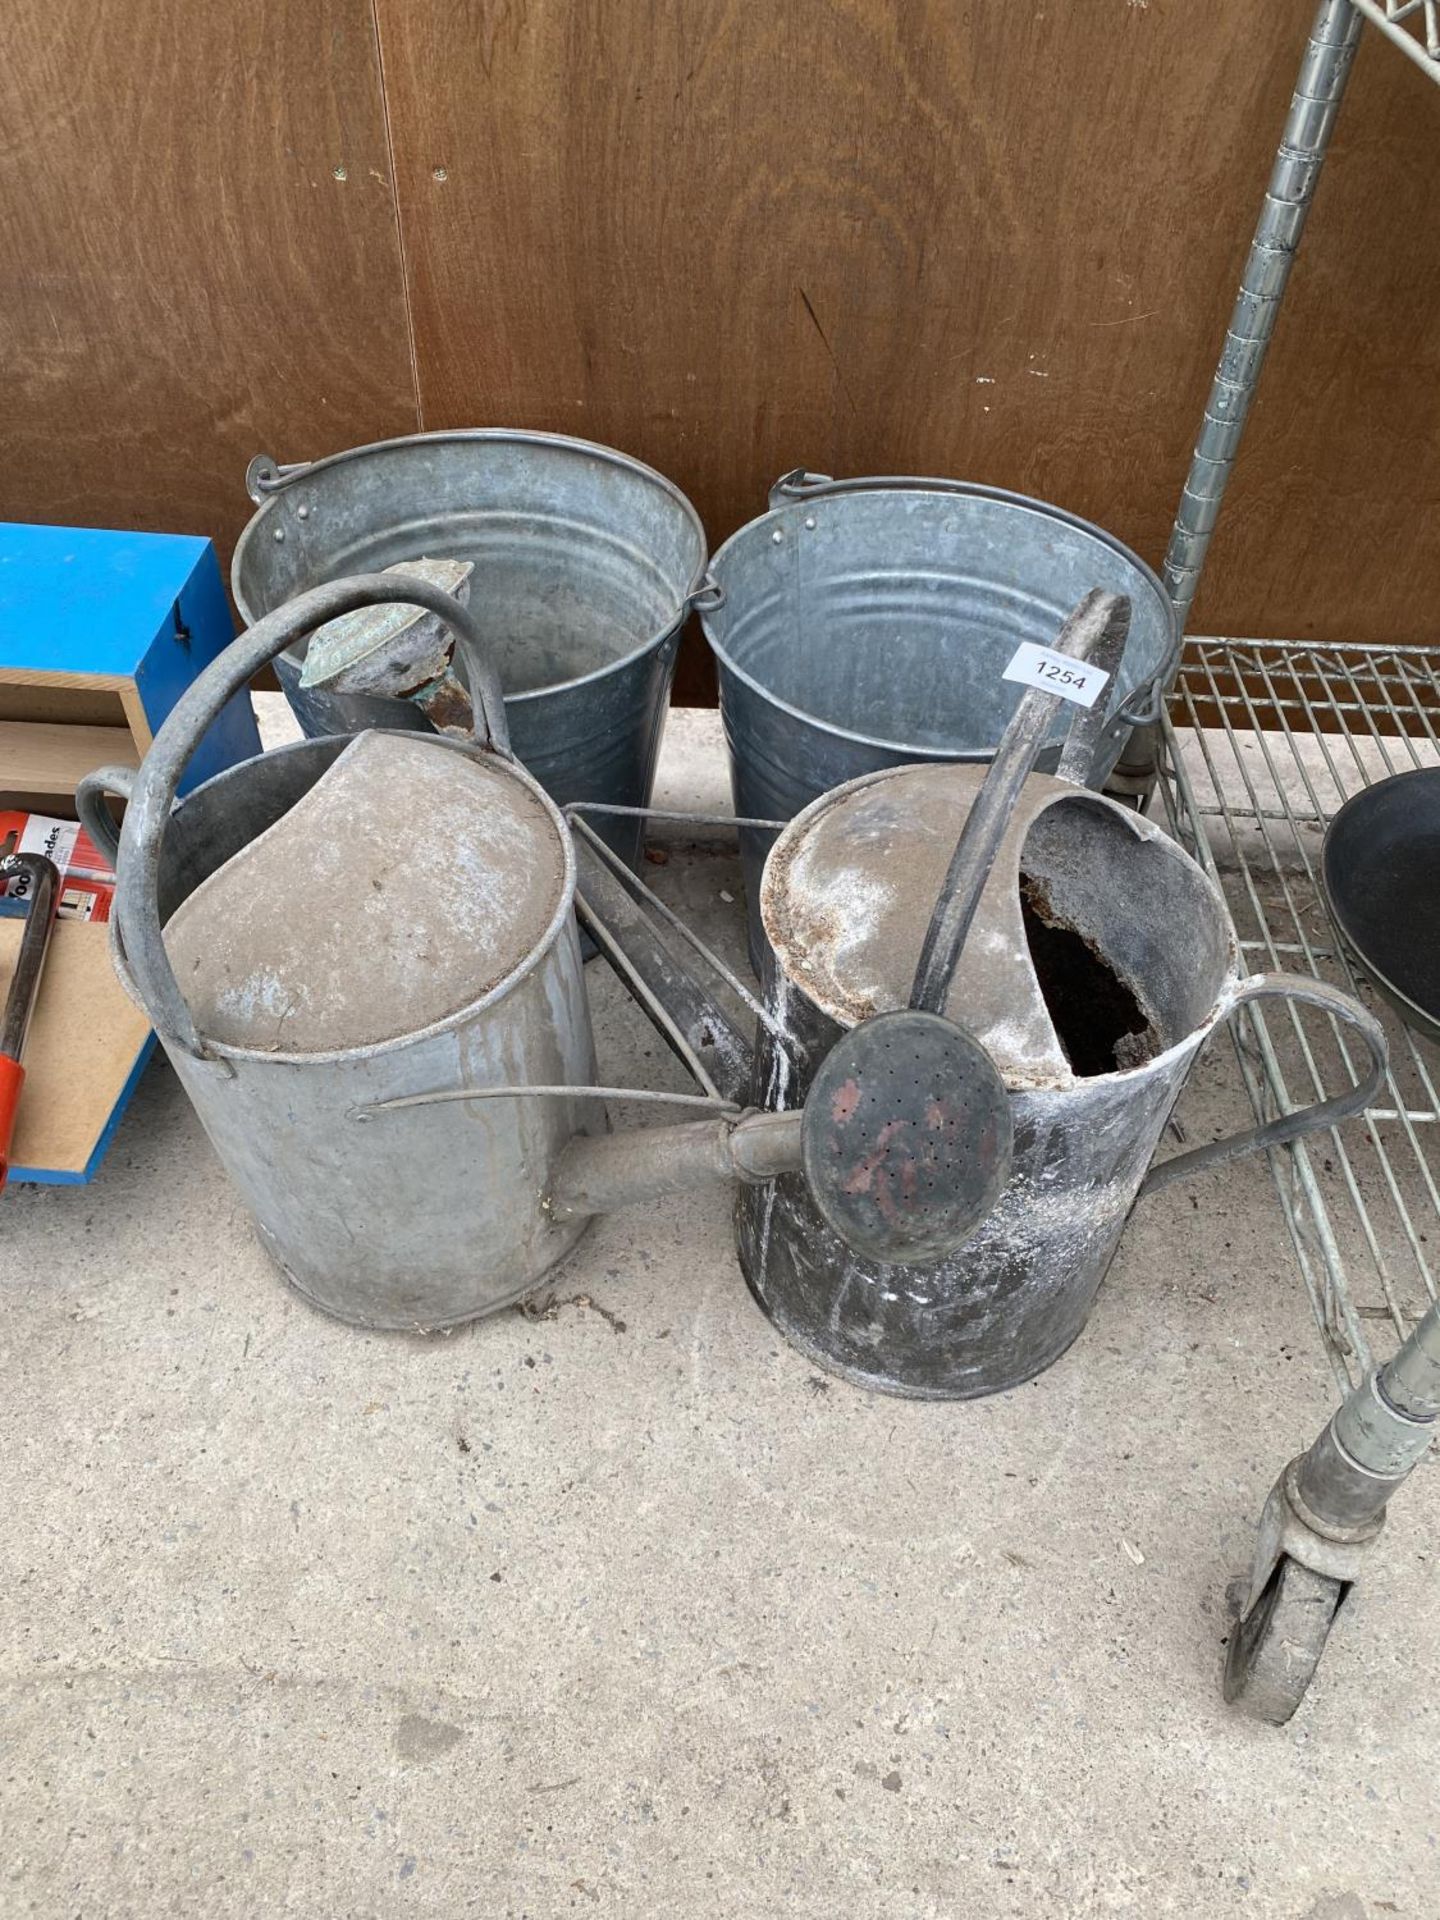 TWO VINTAGE GALVANISED WATERING CANS AND TWO GALVANISED BUCKETS